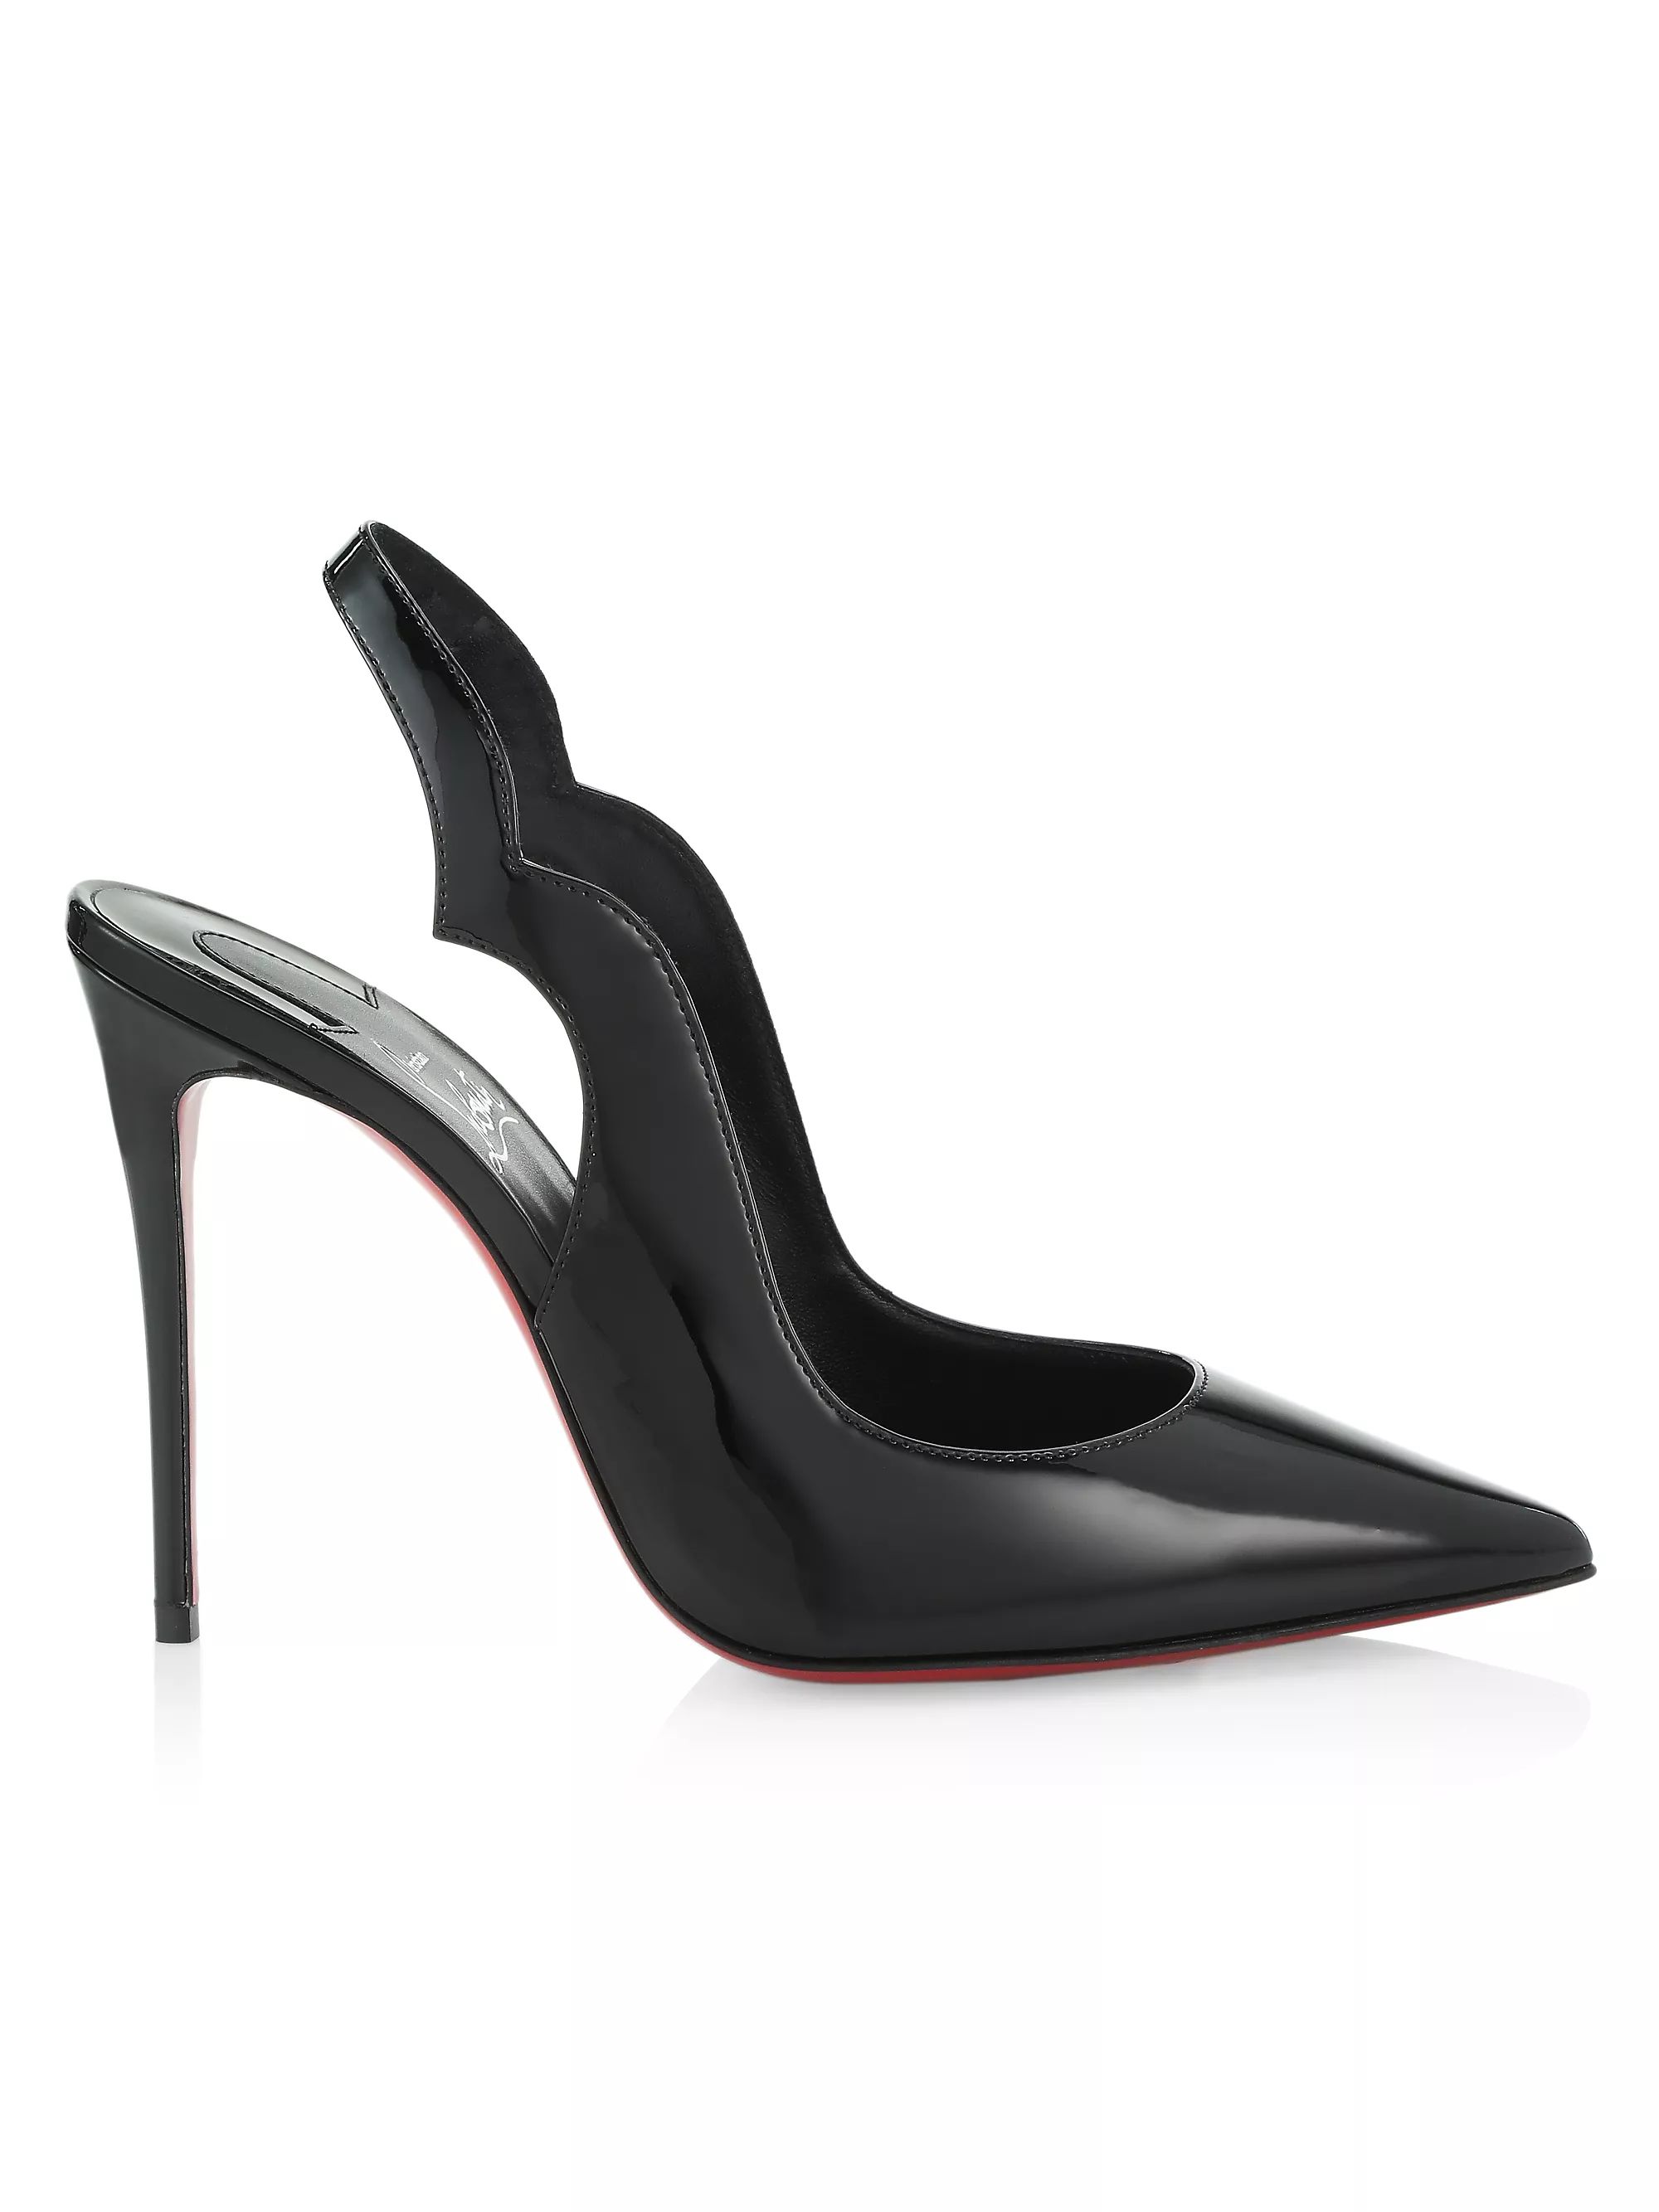 Hot Chick 100 Slingback Patent Leather Pumps | Saks Fifth Avenue